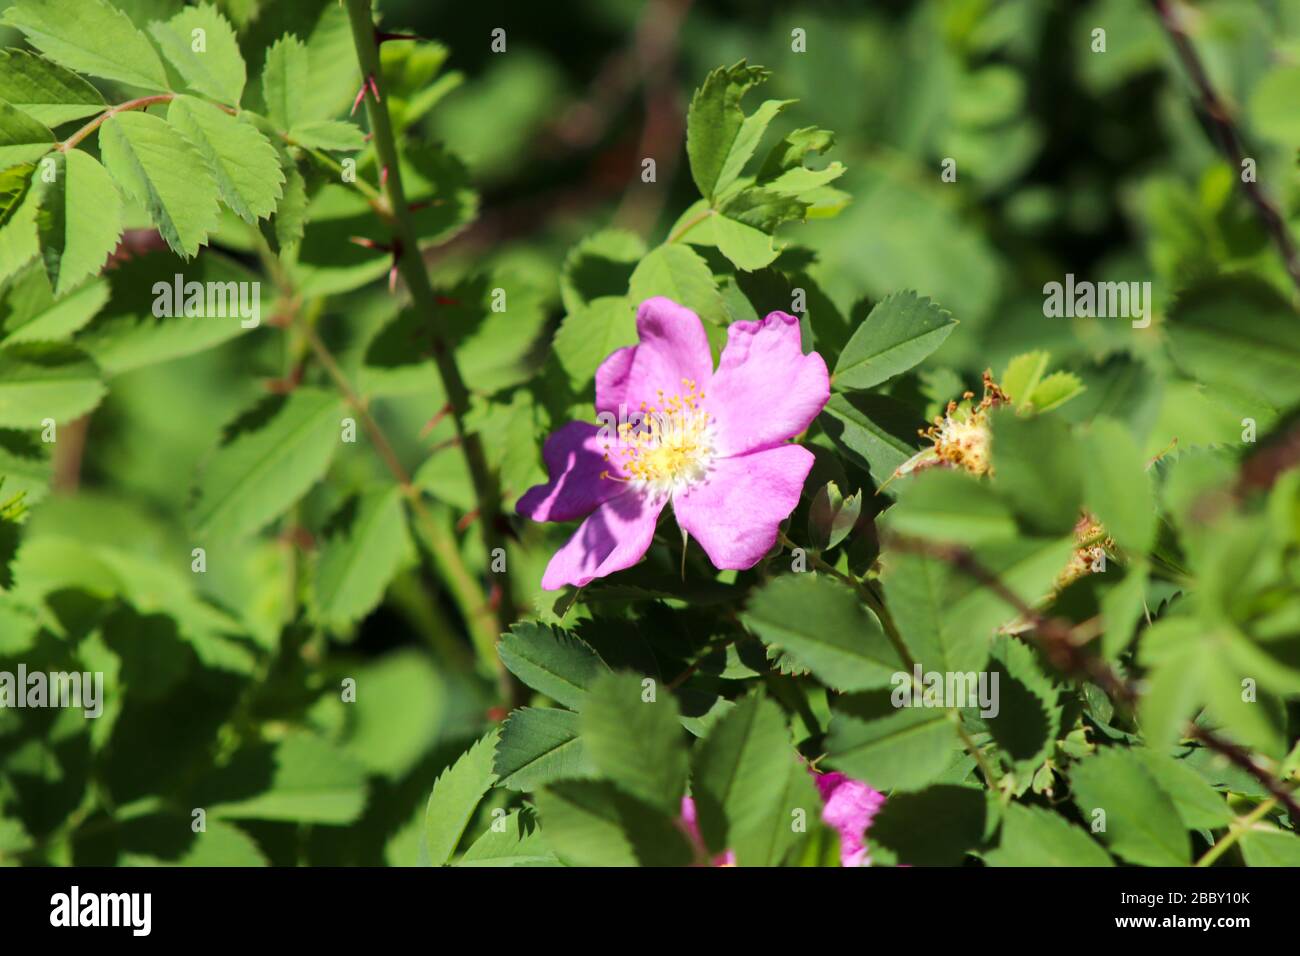 A pink flower on a plant Stock Photo